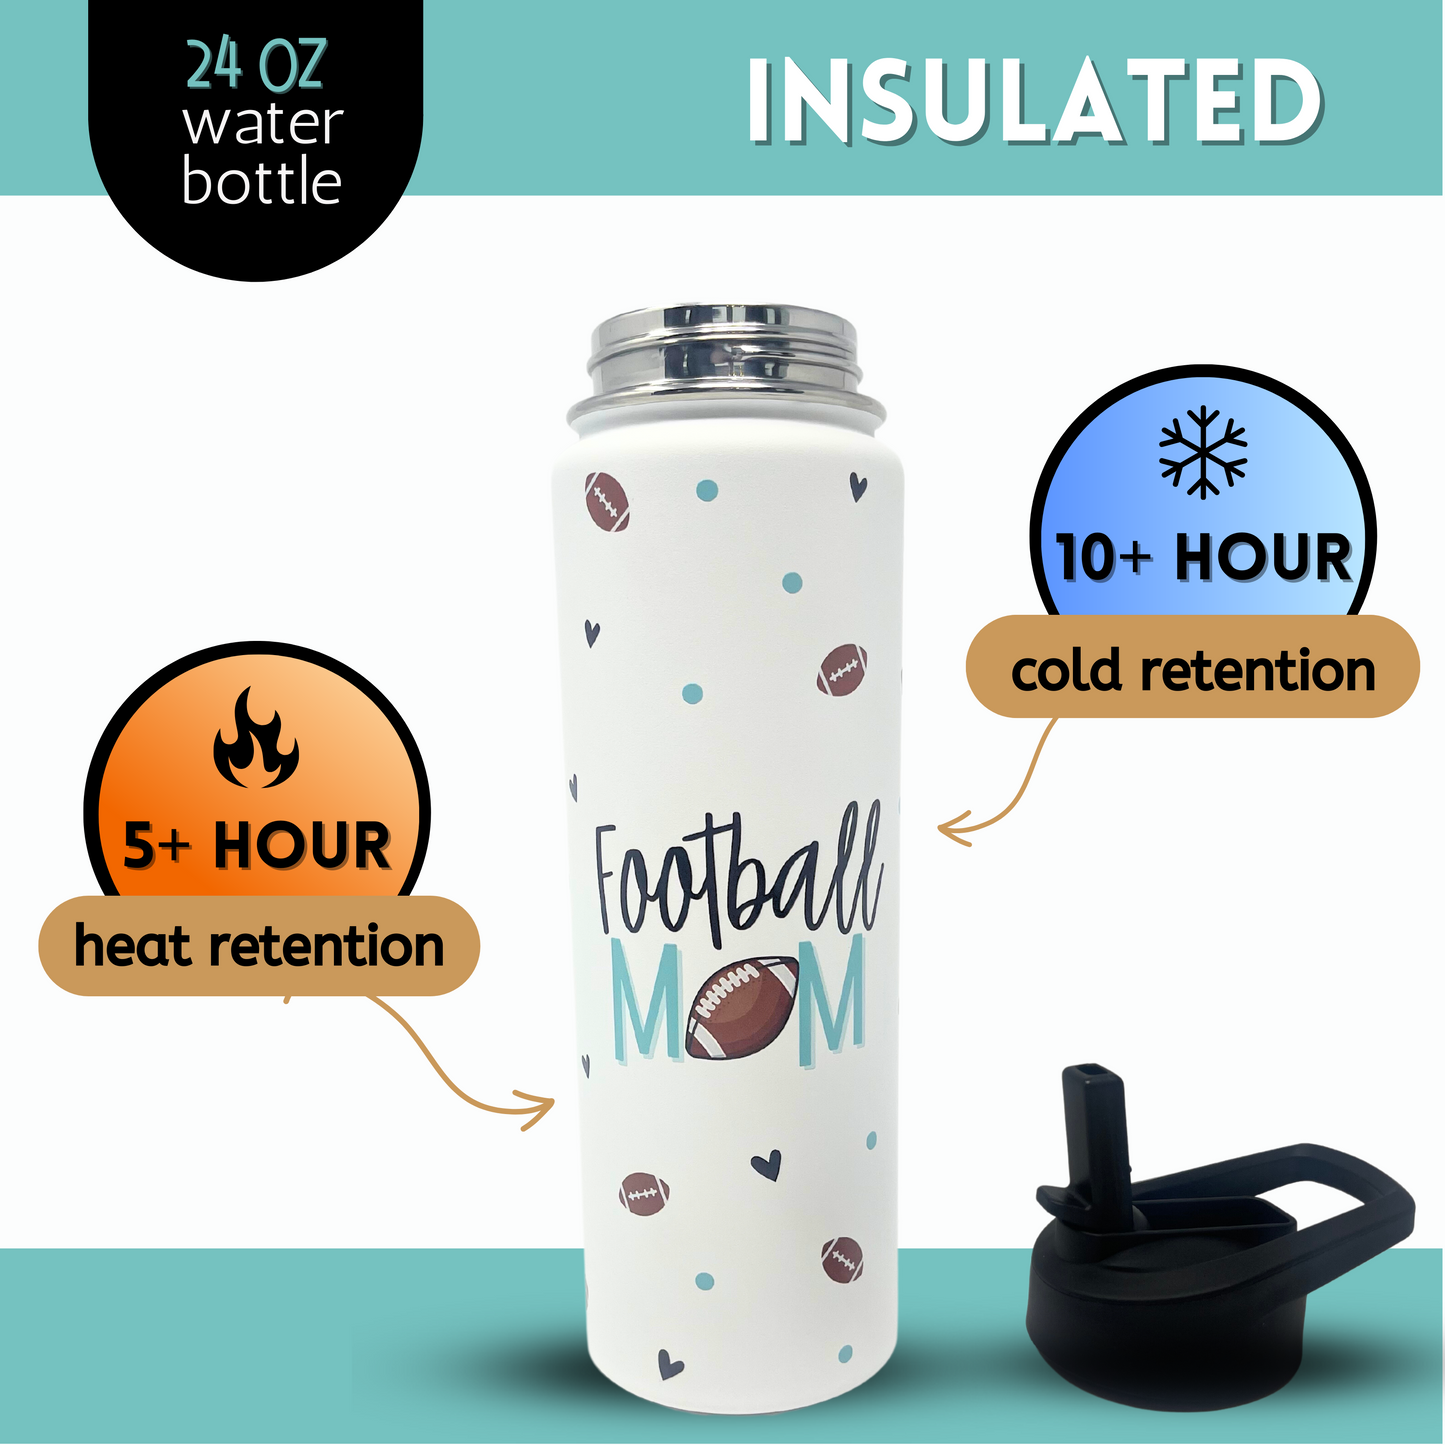 Football Mom Water Bottle Gift - Large Insulated Water Bottle with Straw - Stainless Steel Metal 24 oz Travel Cup for Mom, Mama, Mother, Wife, Women | Keeps Hot and Cold for Hours